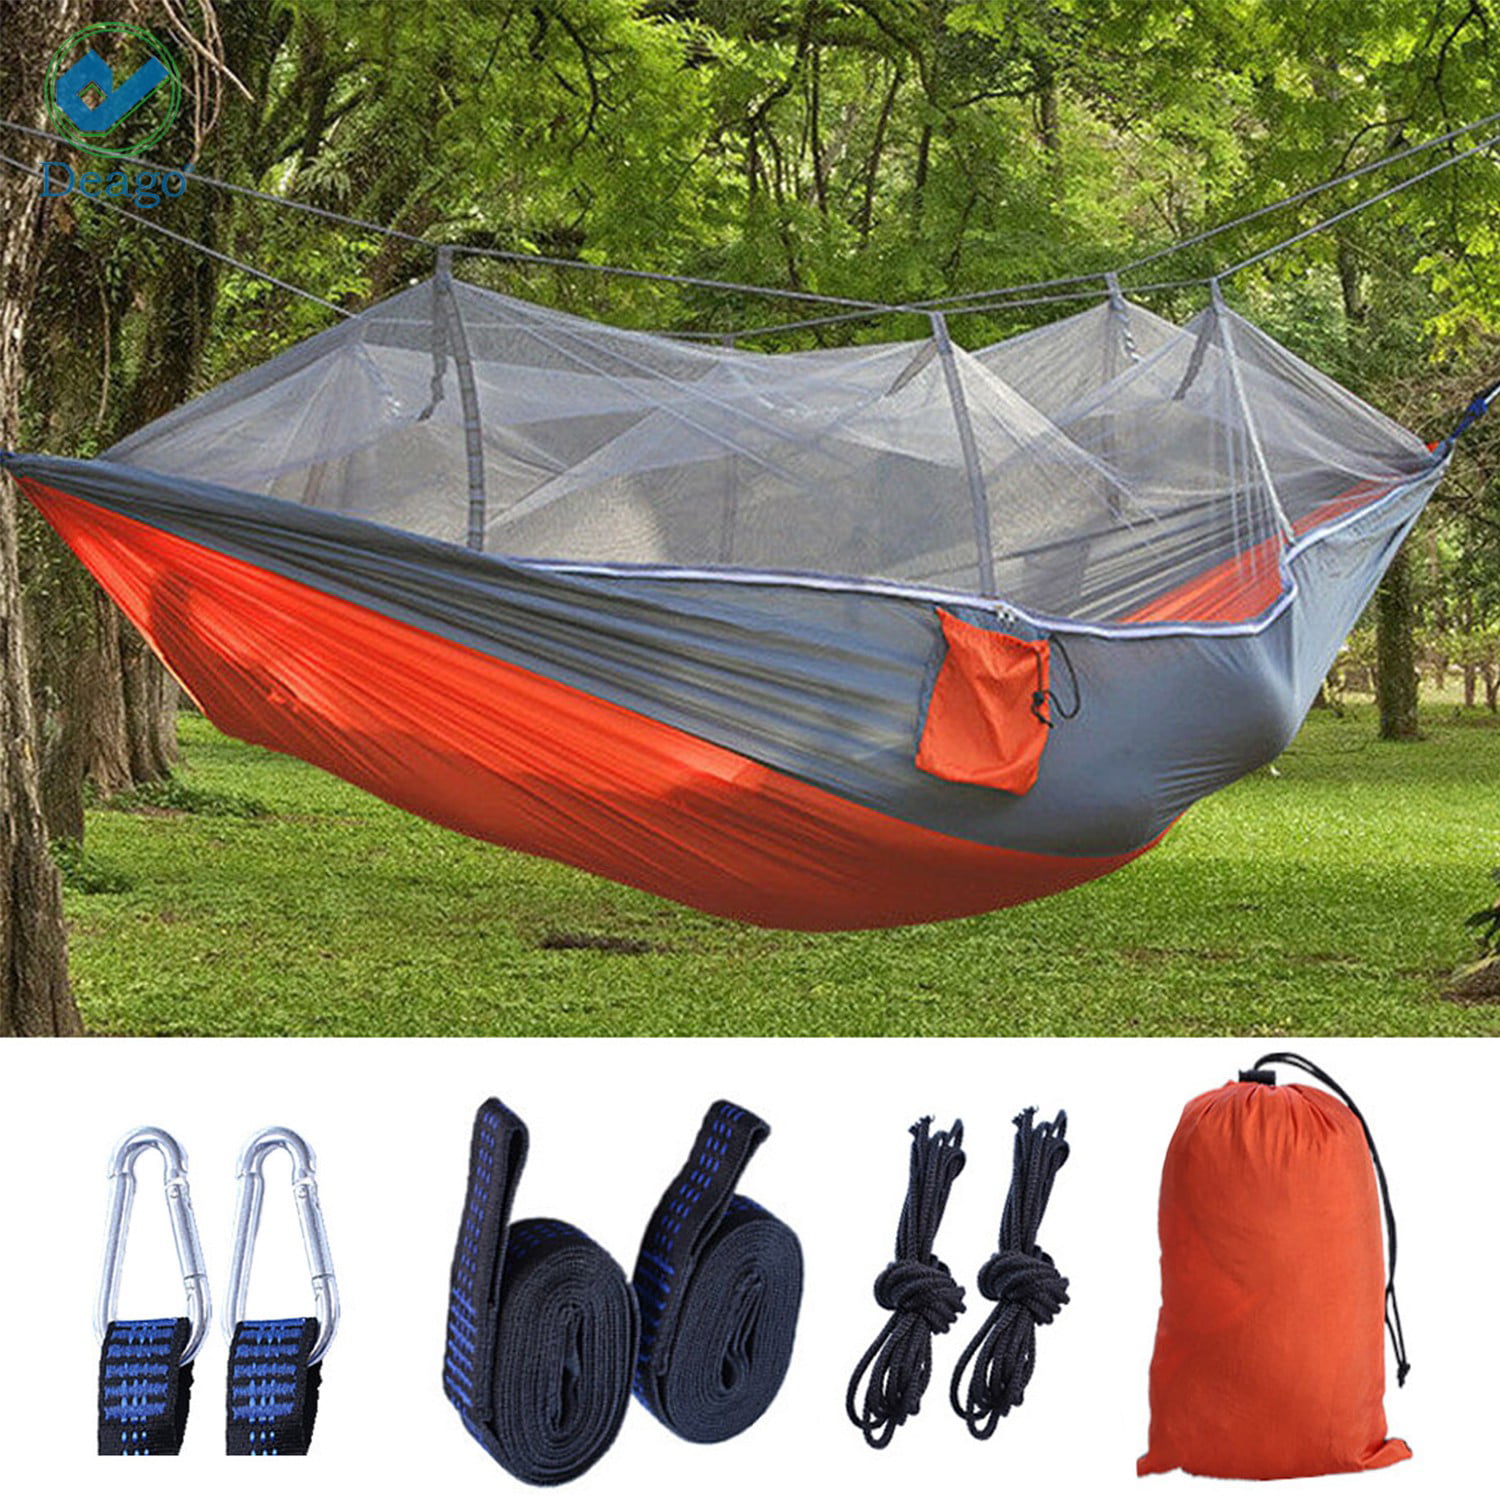 Camping Hammock With Mosquito Net Orange For Outdoor Hiking Backpacking Travel